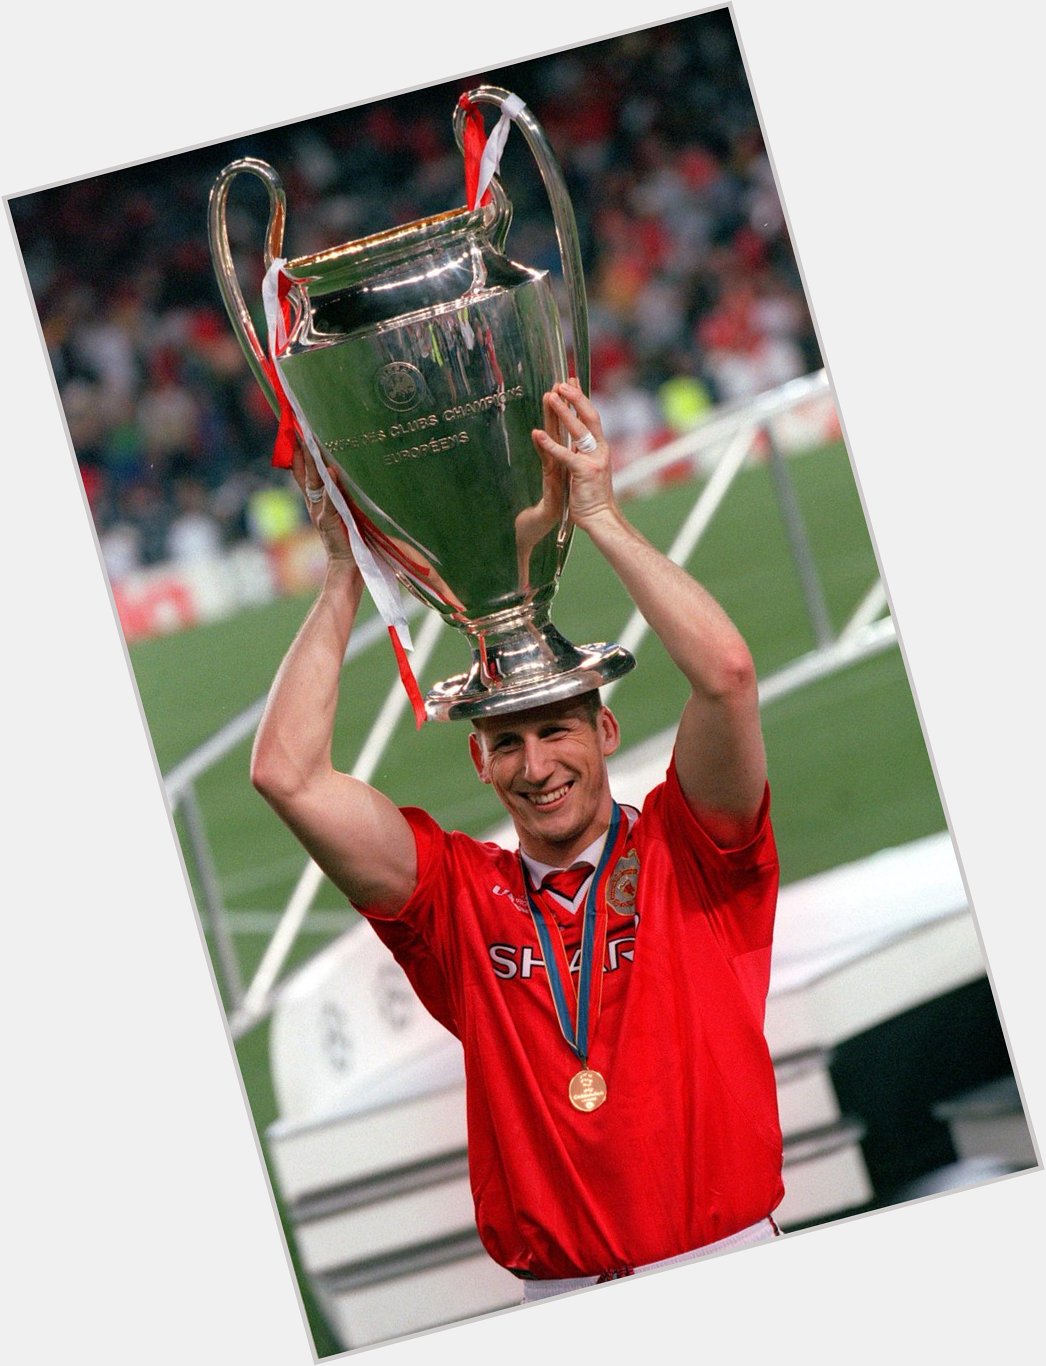 A rock at the back Happy Birthday, 1999 winner Jaap Stam! 